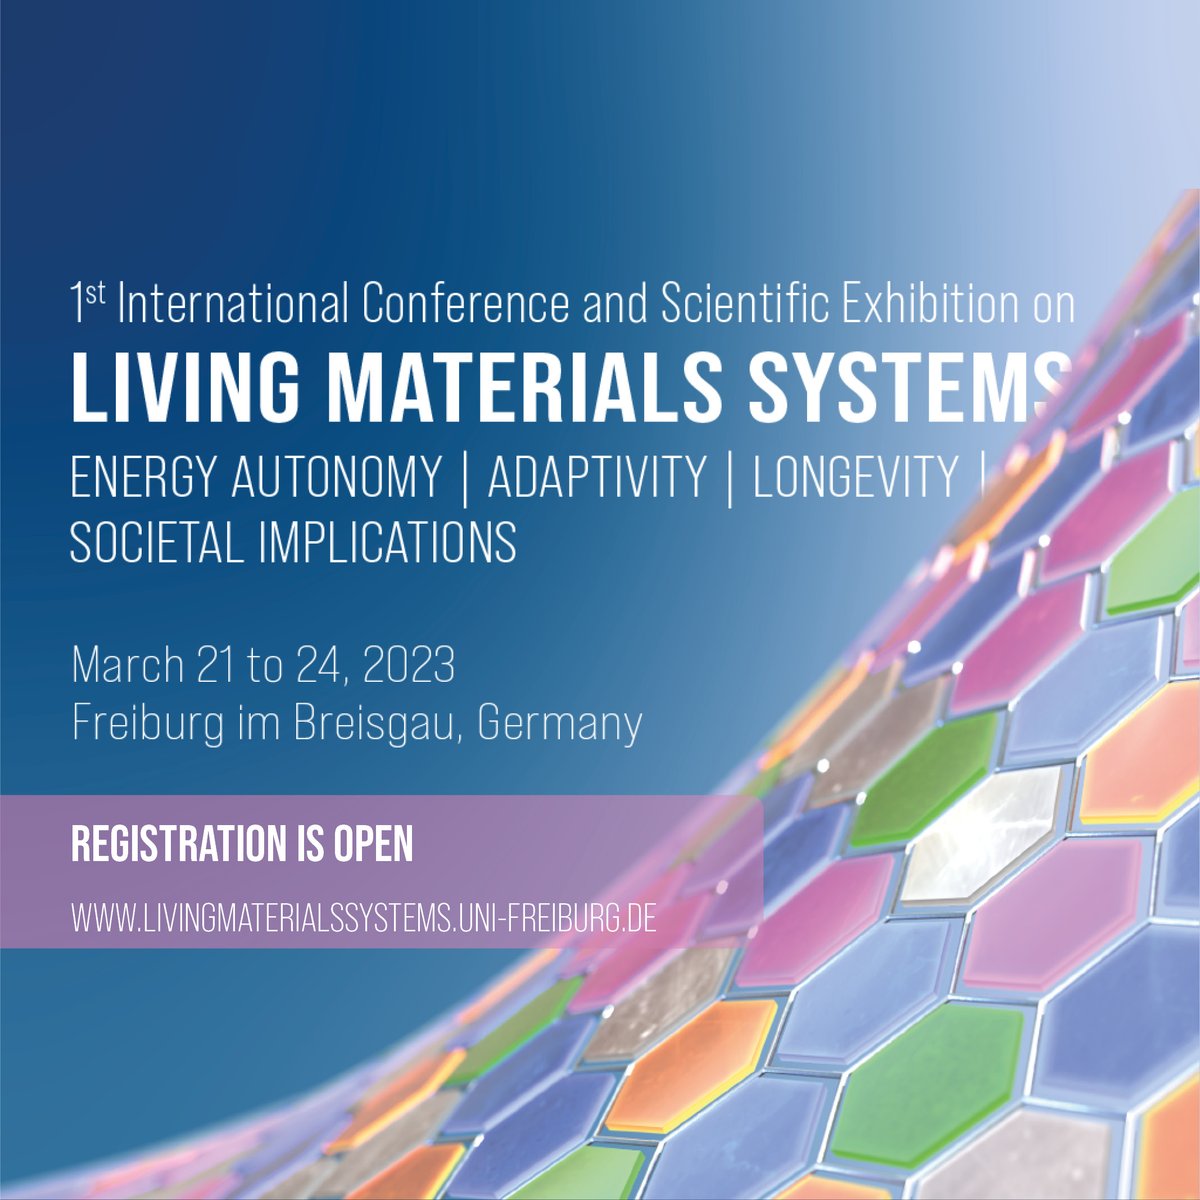 📢 Registration is now open for #livMatS 1st International #Conference and Scientific Exhibition on Living Materials Systems #LMS2023 @UniFreiburg! Do not miss our early bird offer! 🐦 We are looking forward to seeing you in #Freiburg! ➡️livingmaterialssystems.uni-freiburg.de